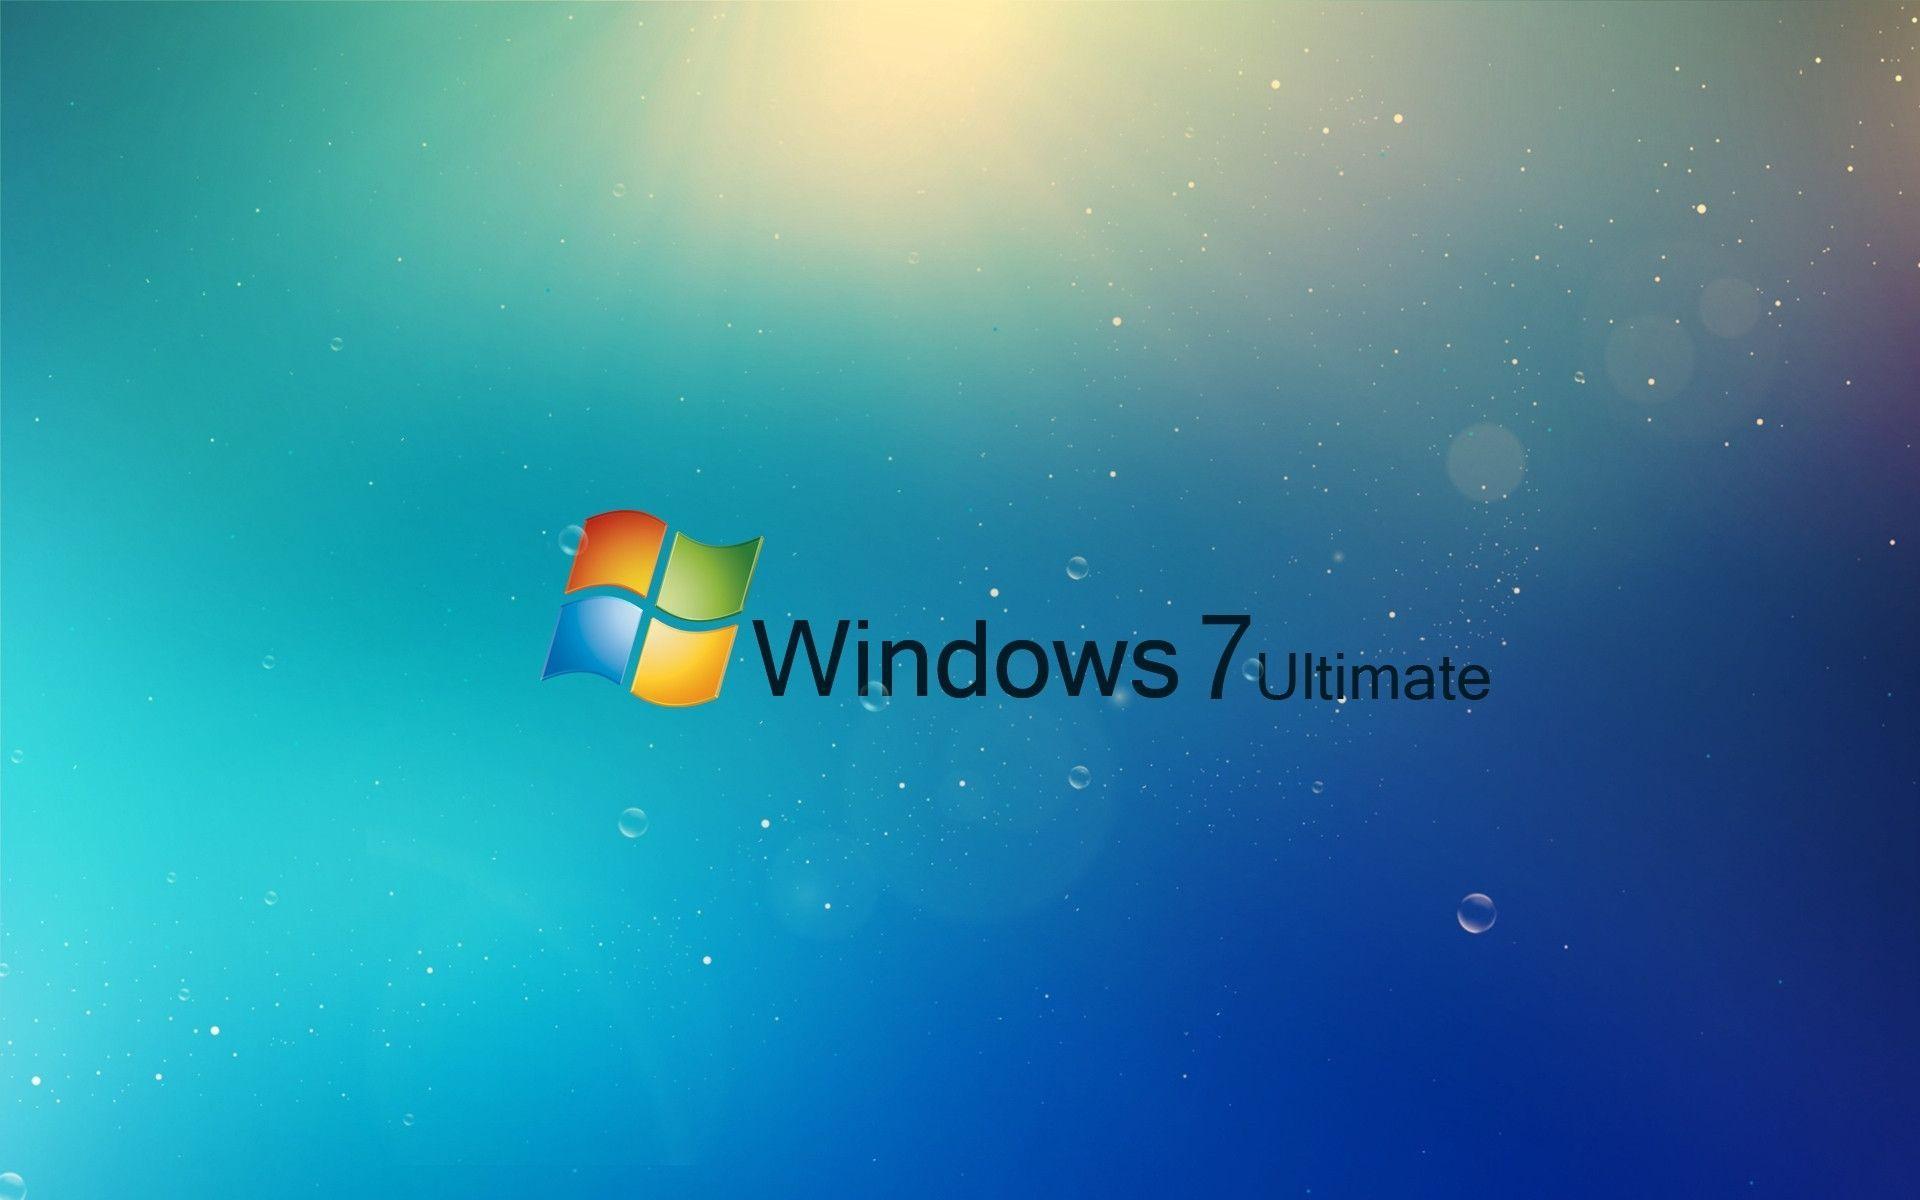 Wallpaper For > Windows 7 Ultimate Background